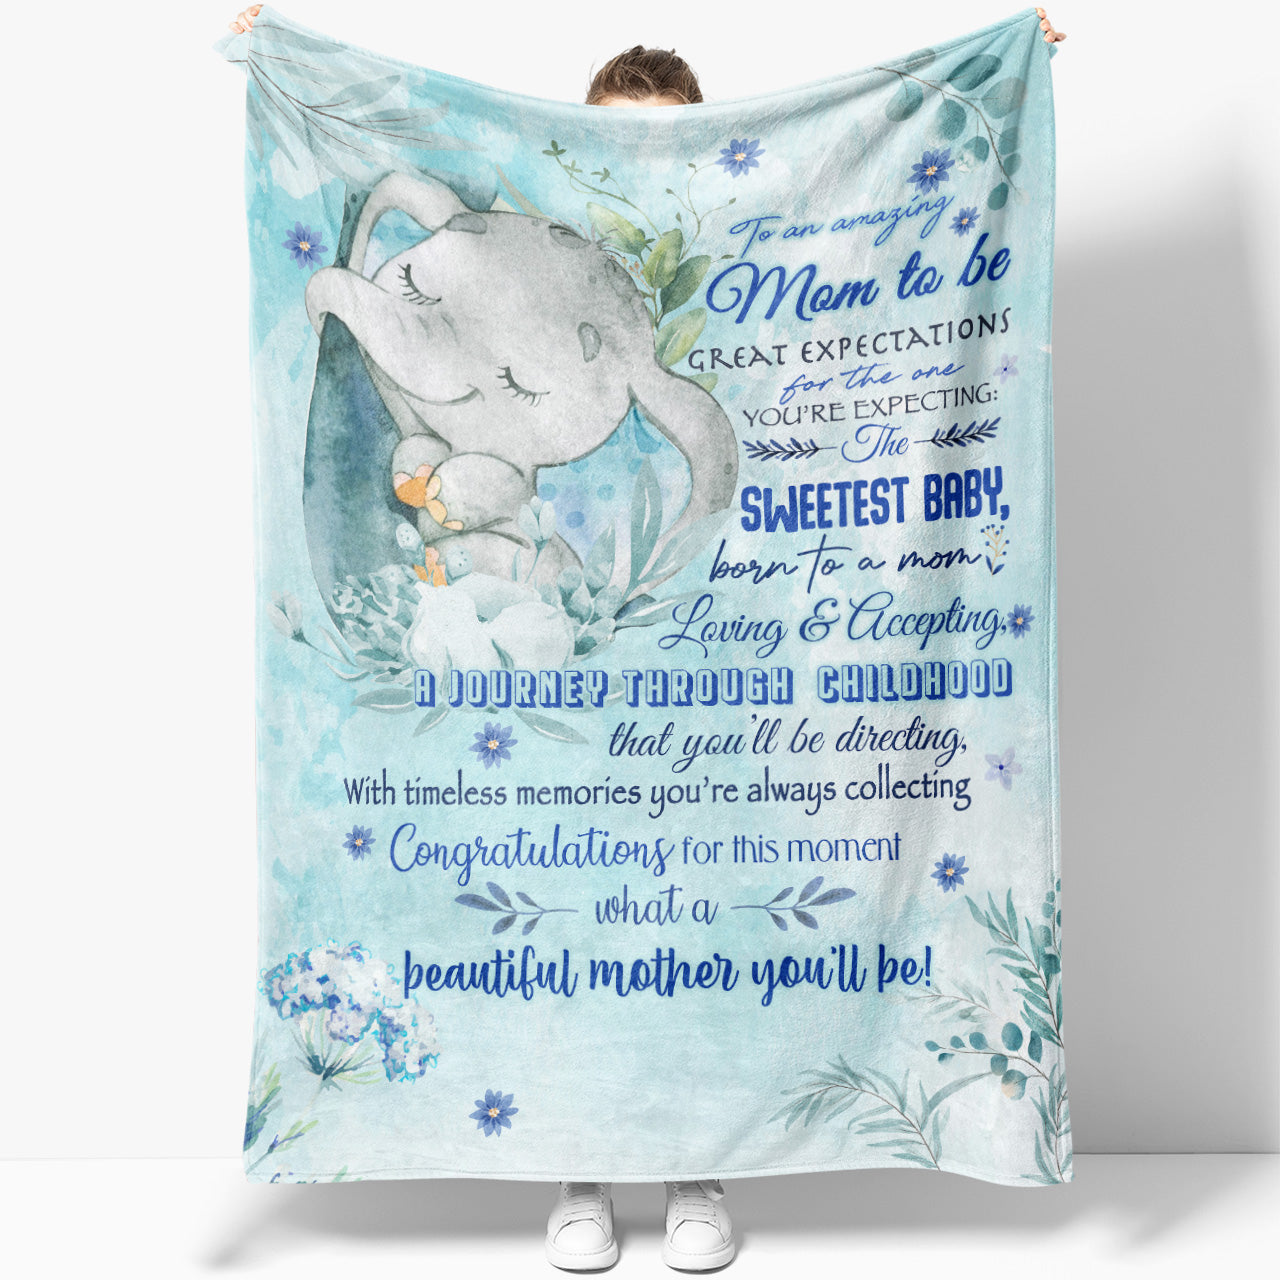 New Mom Gifts for Women- Funny Pregnancy Gifts for First Time Moms to Be  Gift, Baby Shower Gifts, Gifts for New Mom, Mothers Day Gift, Lavender